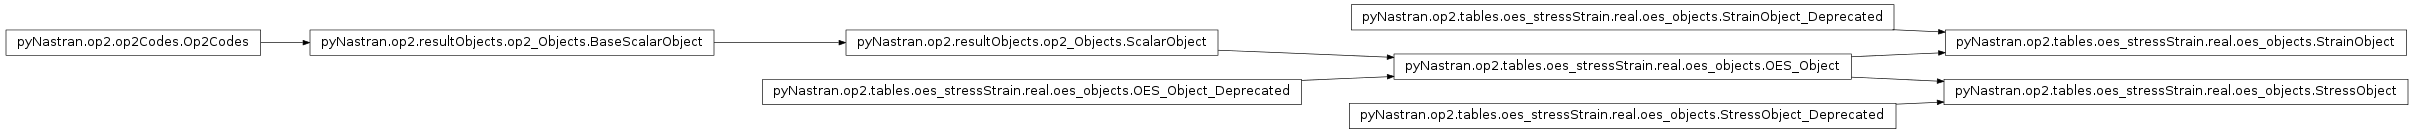 Inheritance diagram of pyNastran.op2.tables.oes_stressStrain.real.oes_objects